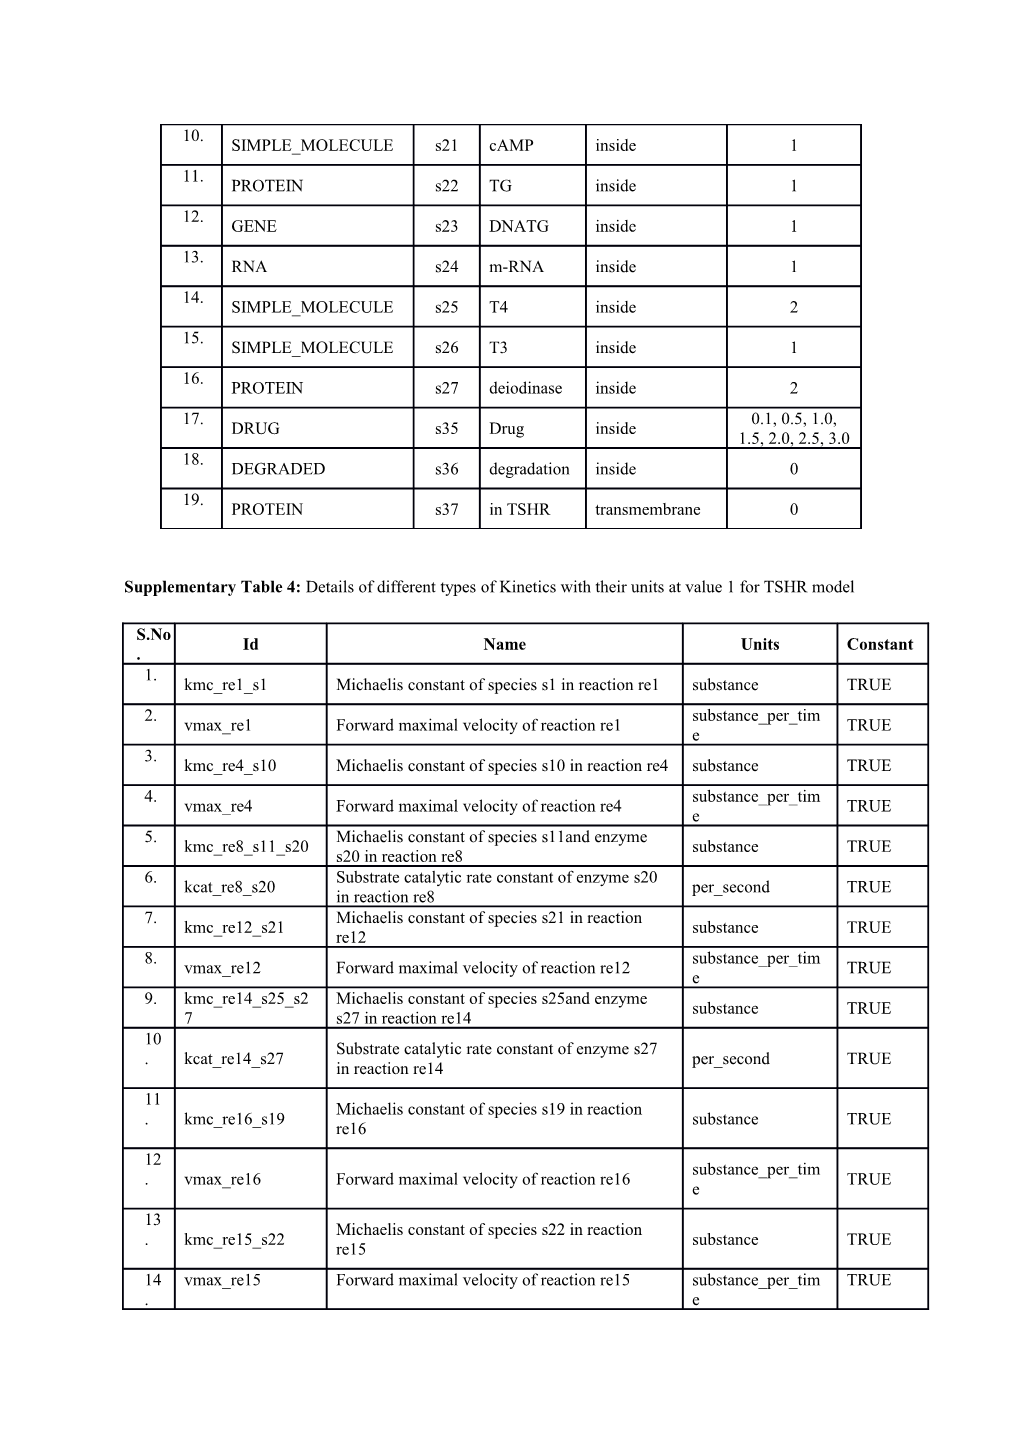 Supplementary Table1: List of Class of Molecule, Entity, Their Position and Amount Used